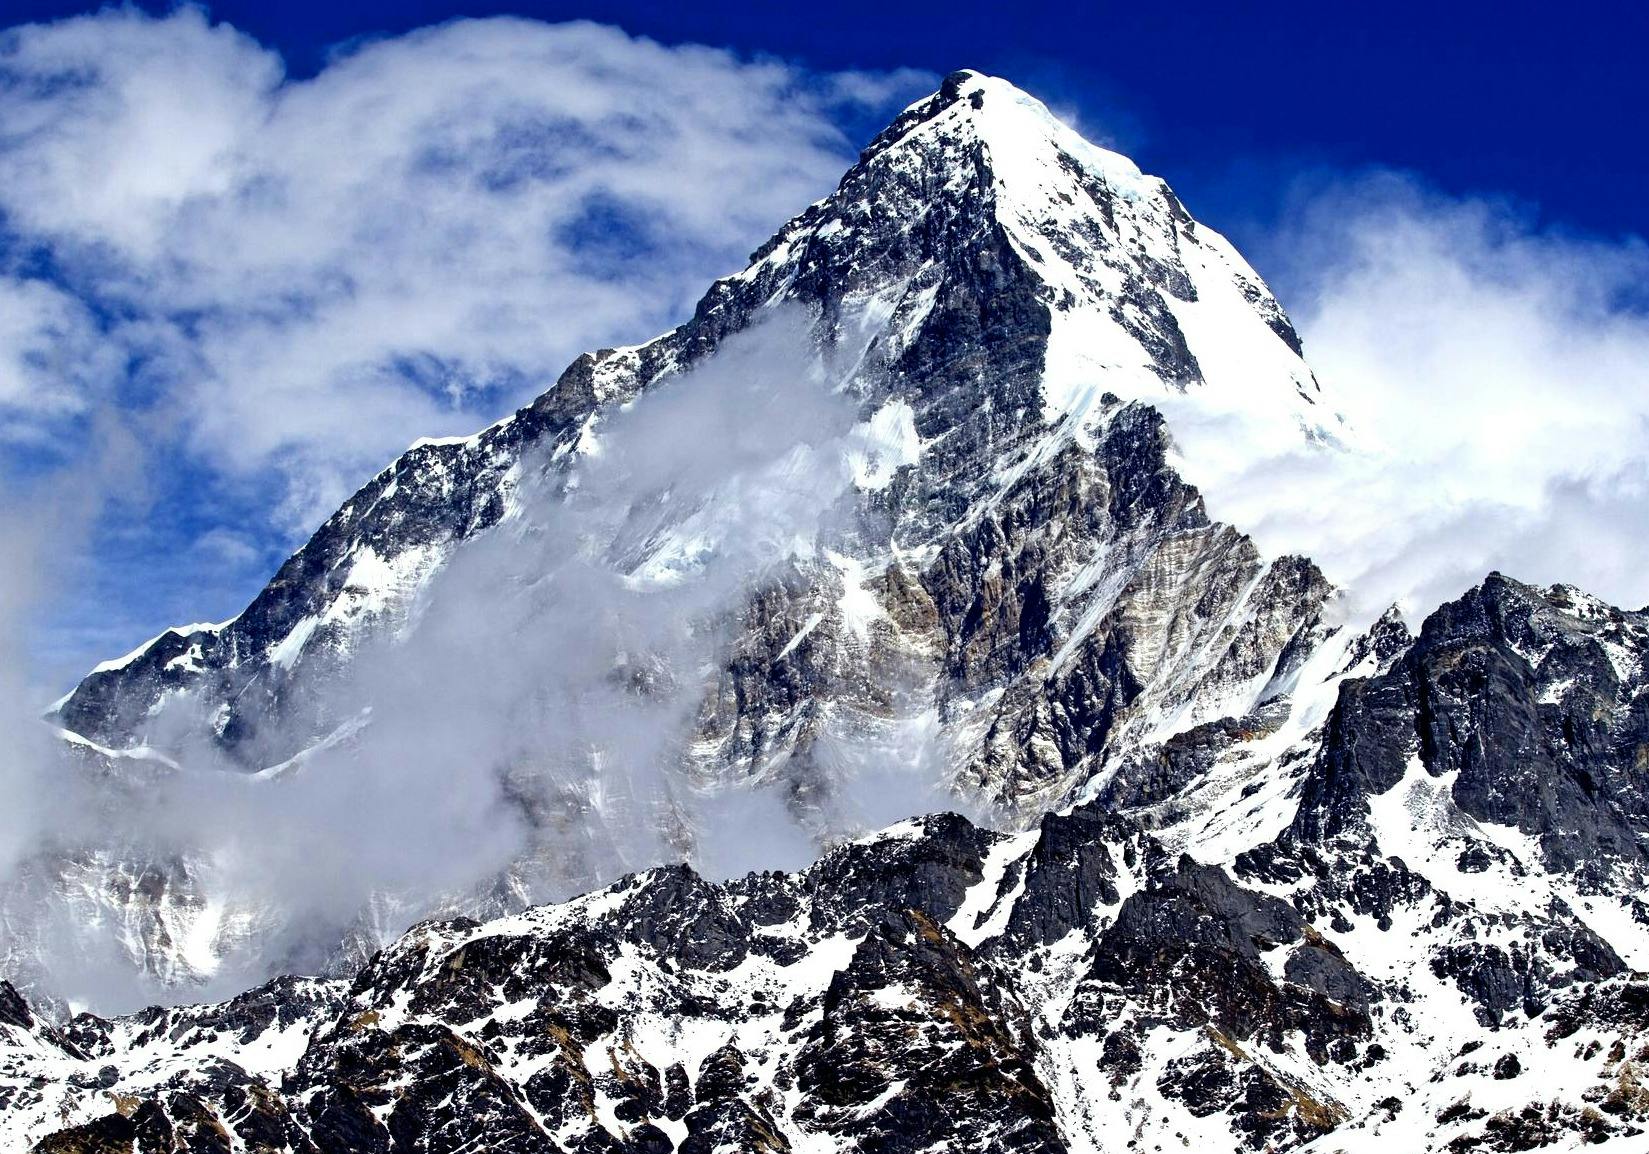 Obstacles Encountered While Climbing 7000-meter Summits in Nepal